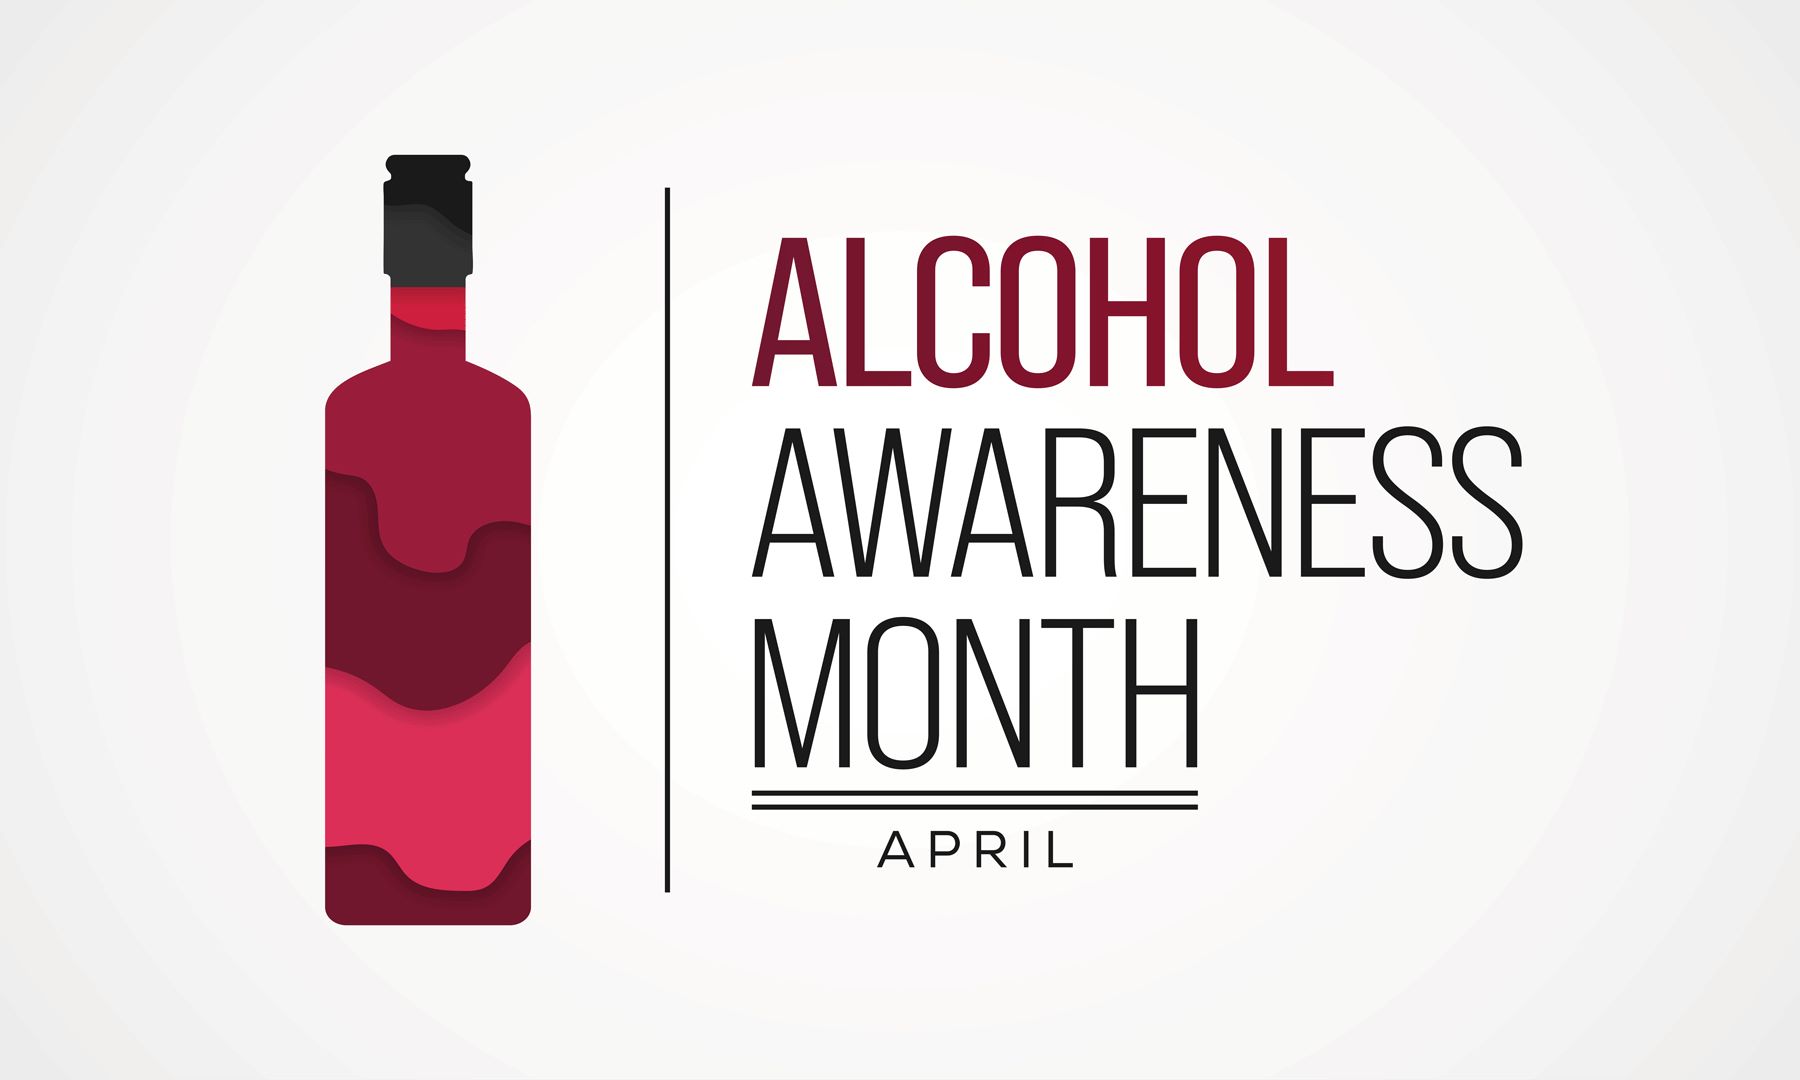 10-facts-about-national-alcohol-awareness-month-april